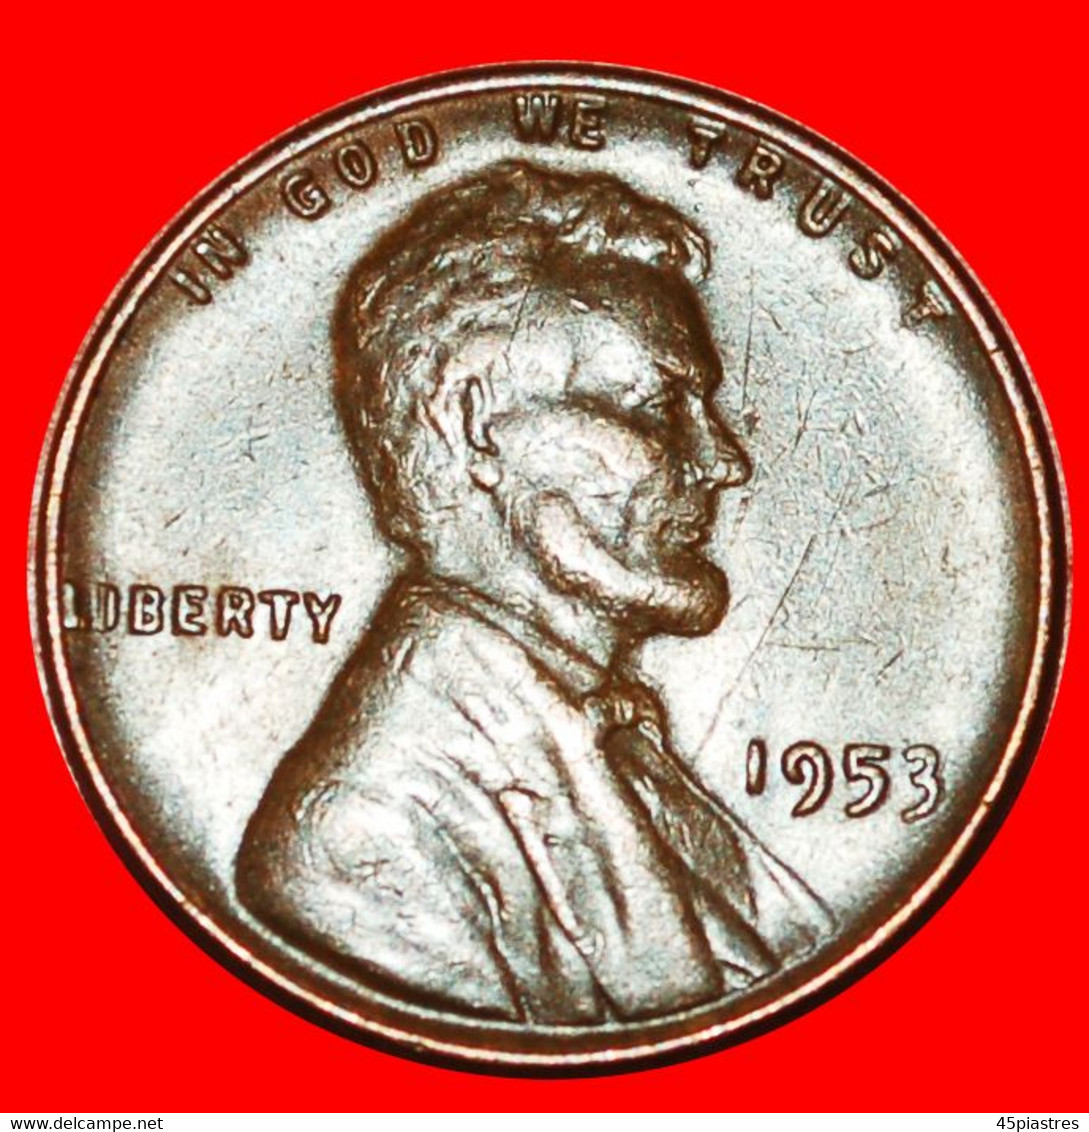 · DISCOVERY COIN WHEAT PENNY (1909-1958): USA ★ 1 CENT 1953! UNPUBLISHED! LOW START★ NO RESERVE! - Errors